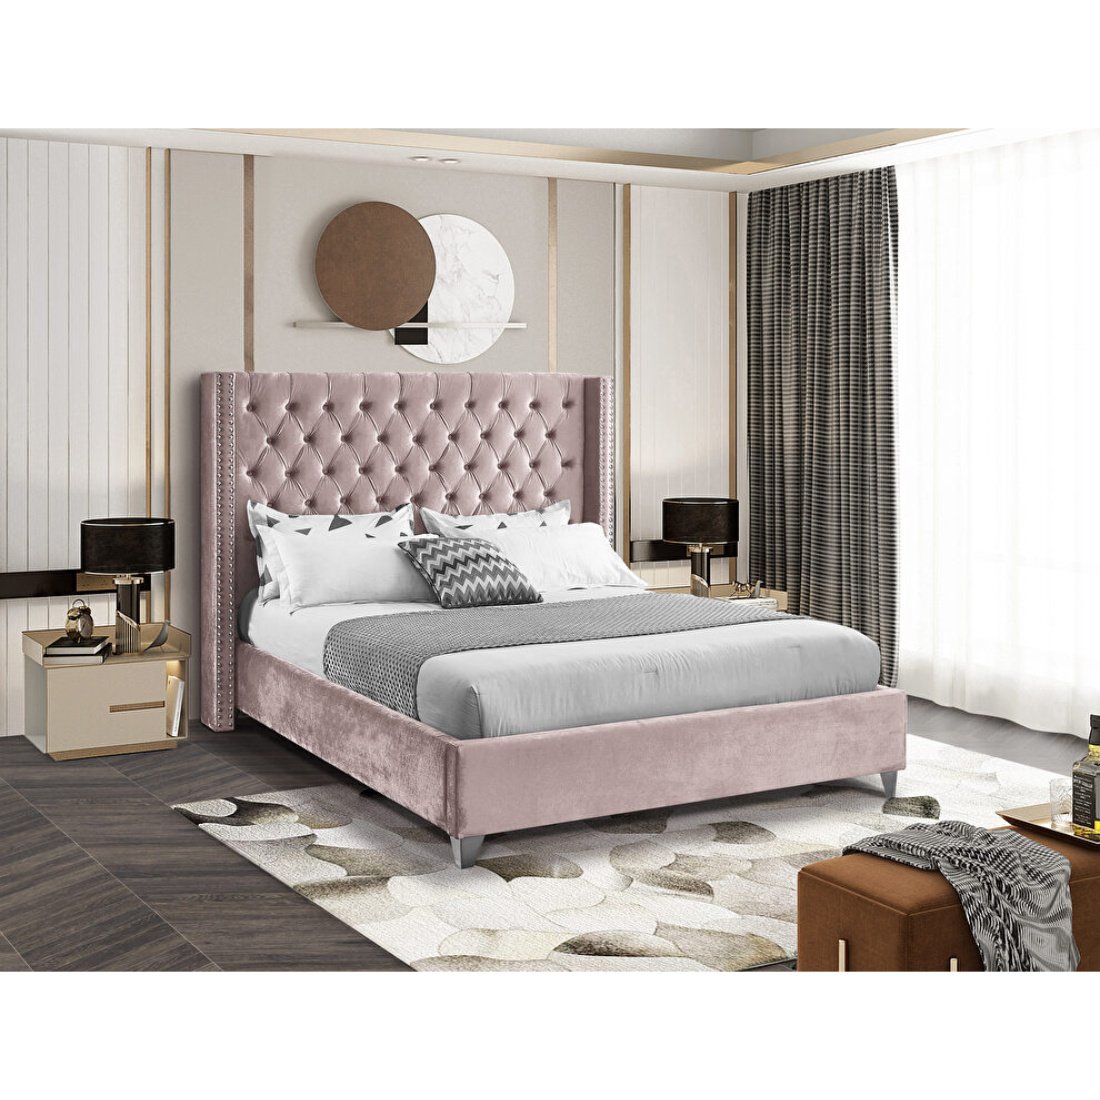 Ibiza King Size Upholstered Bed In, Pink King Size Bed